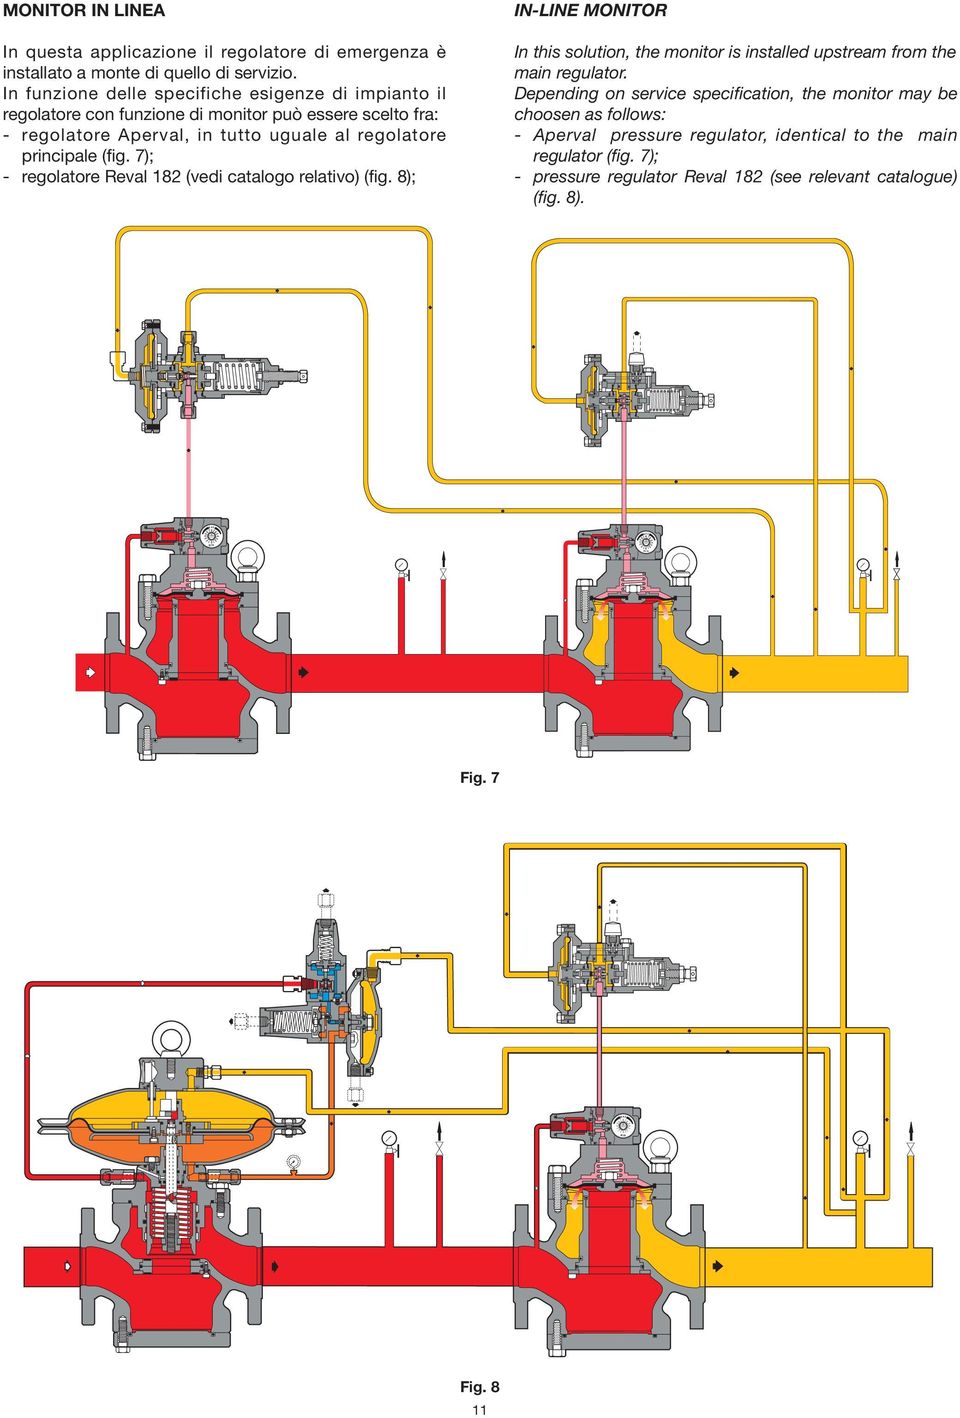 7); - regolatore Reval 182 (vedi catalogo relativo) (fig. 8); IN-LINE MONITOR In this solution, the monitor is installed upstream from the main regulator.